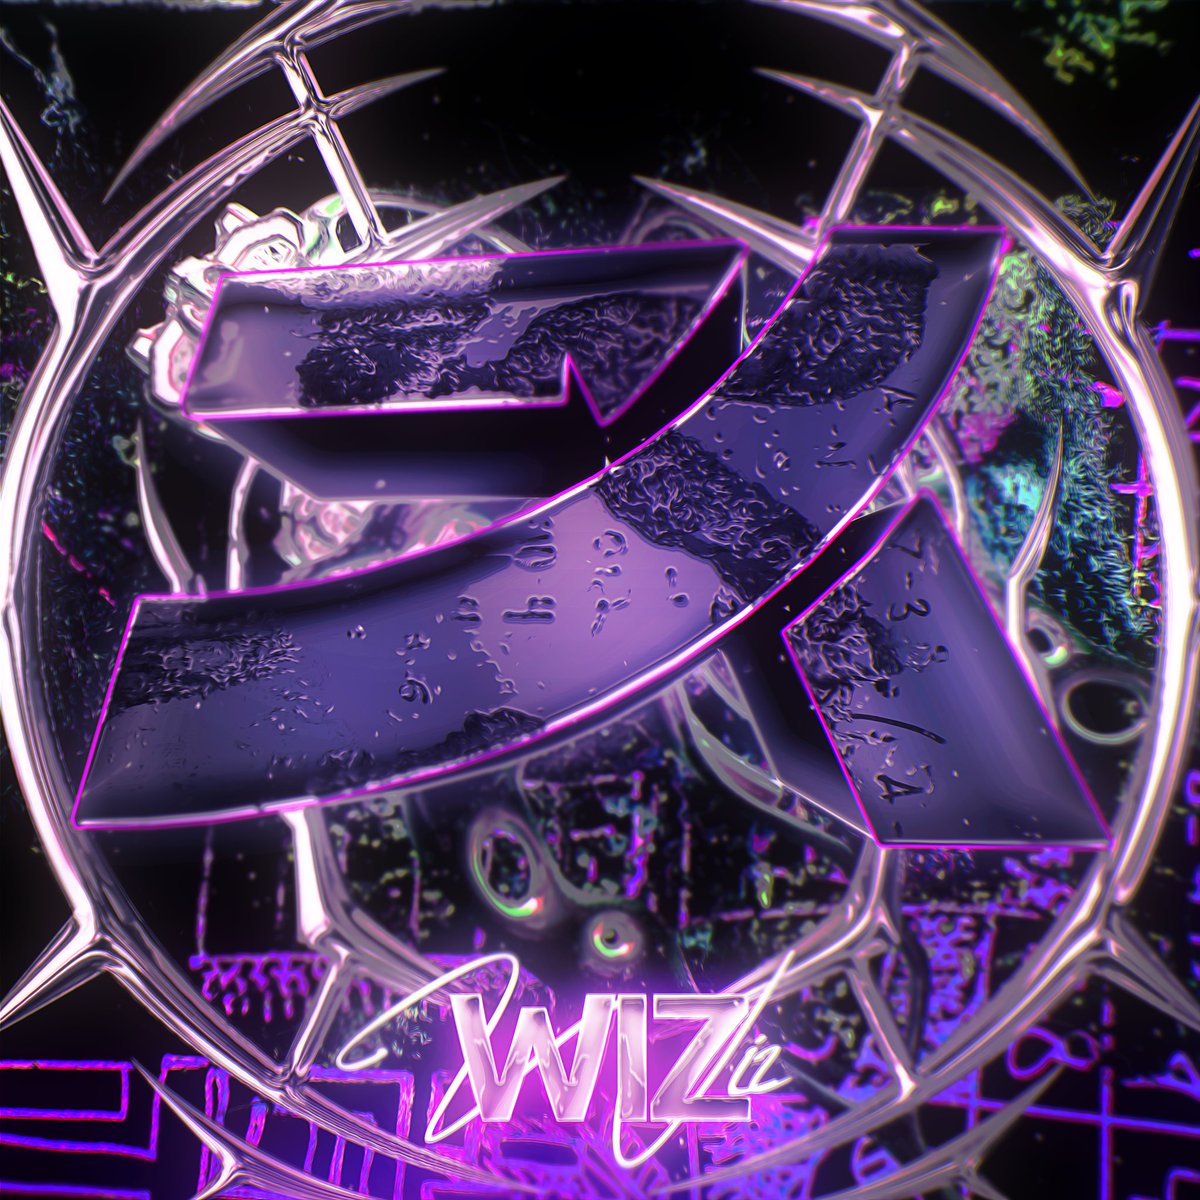 Joined @7kClique as a Creator!